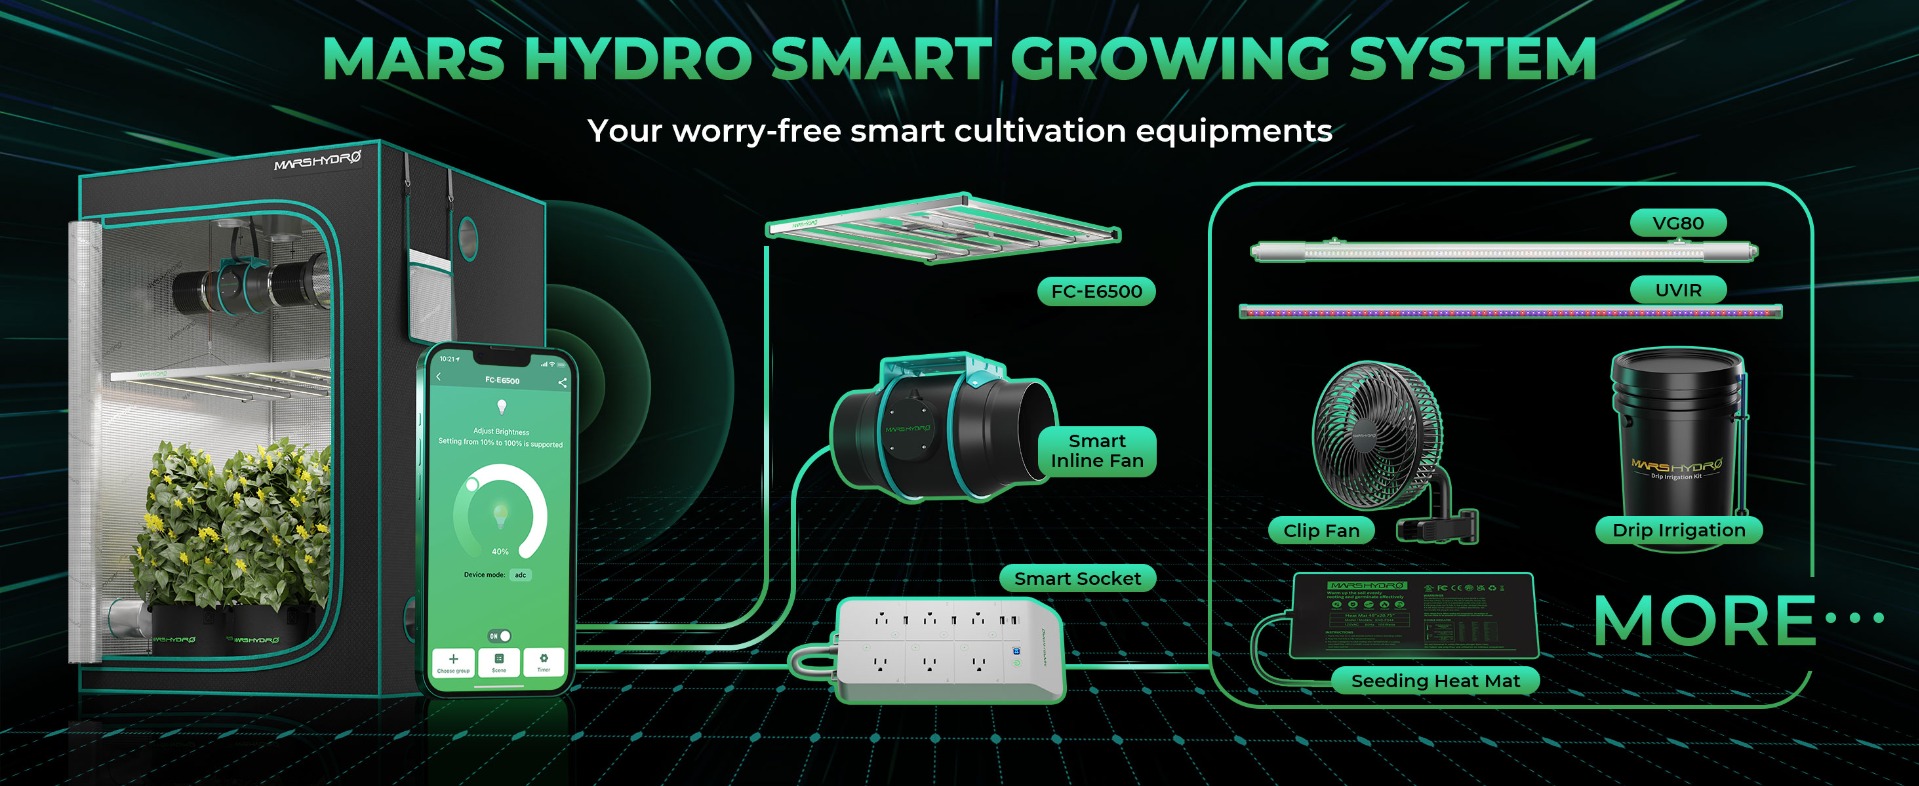 mars hydro smart growing system with fc-e6500 led grow light